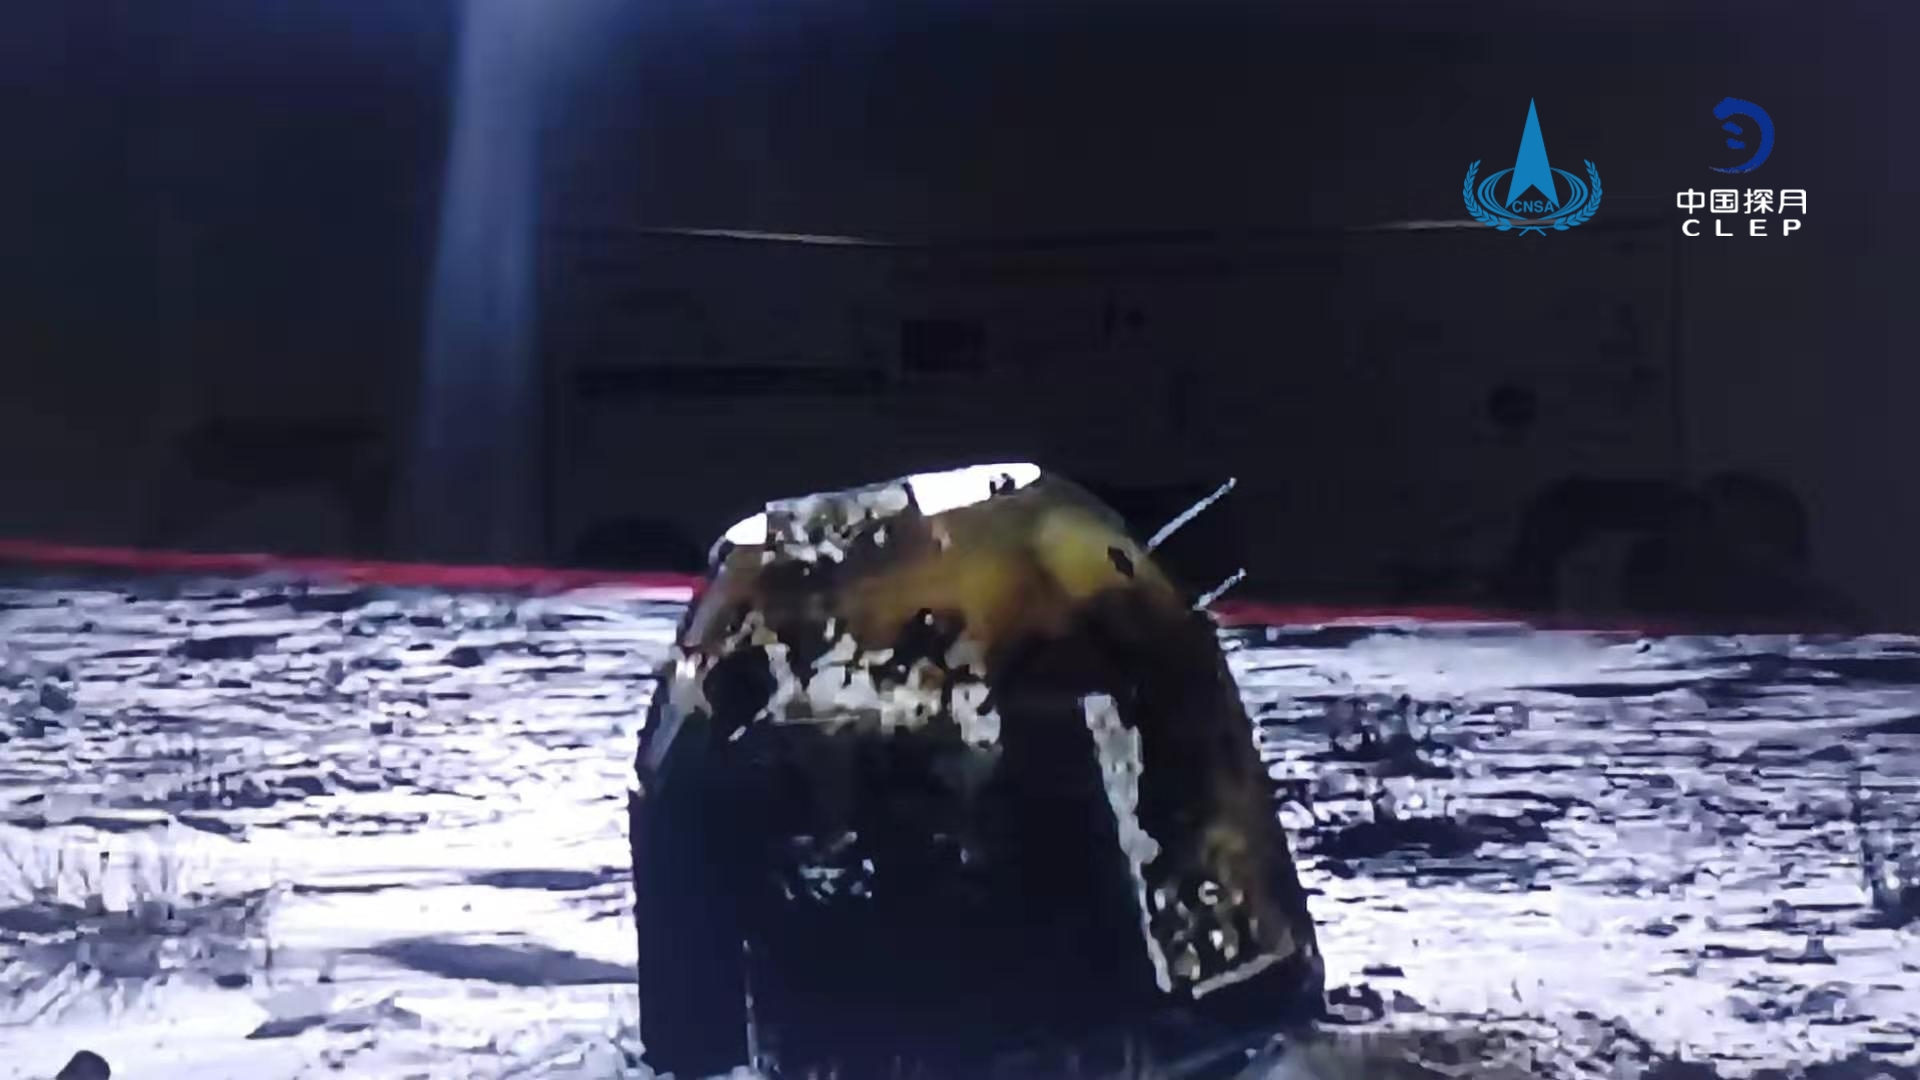 China’s Chang’e 5 moon samples are headed to the lab